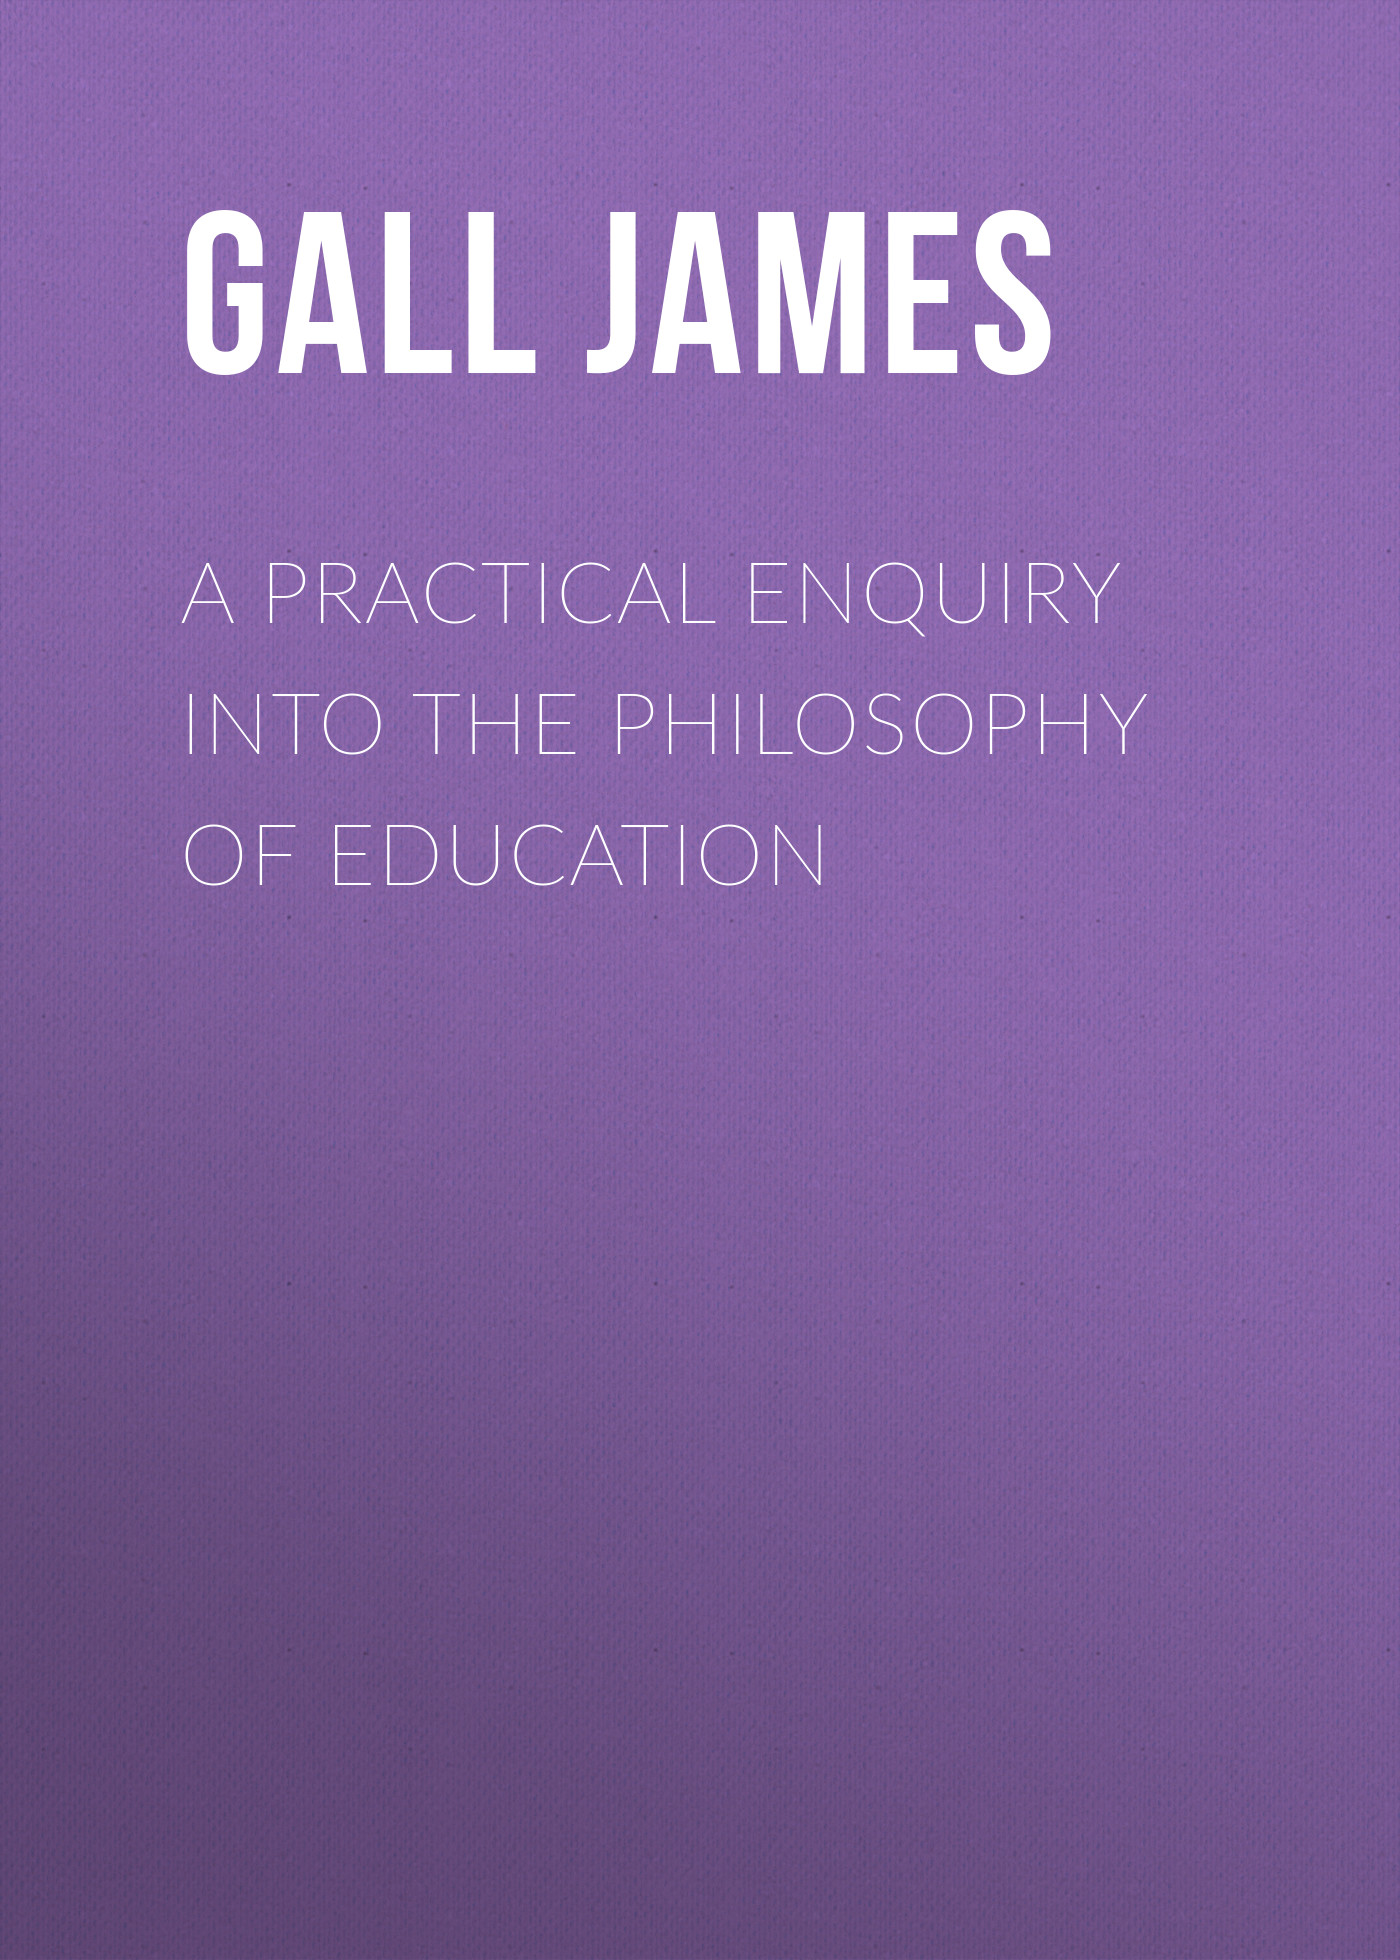 A Practical Enquiry into the Philosophy of Education